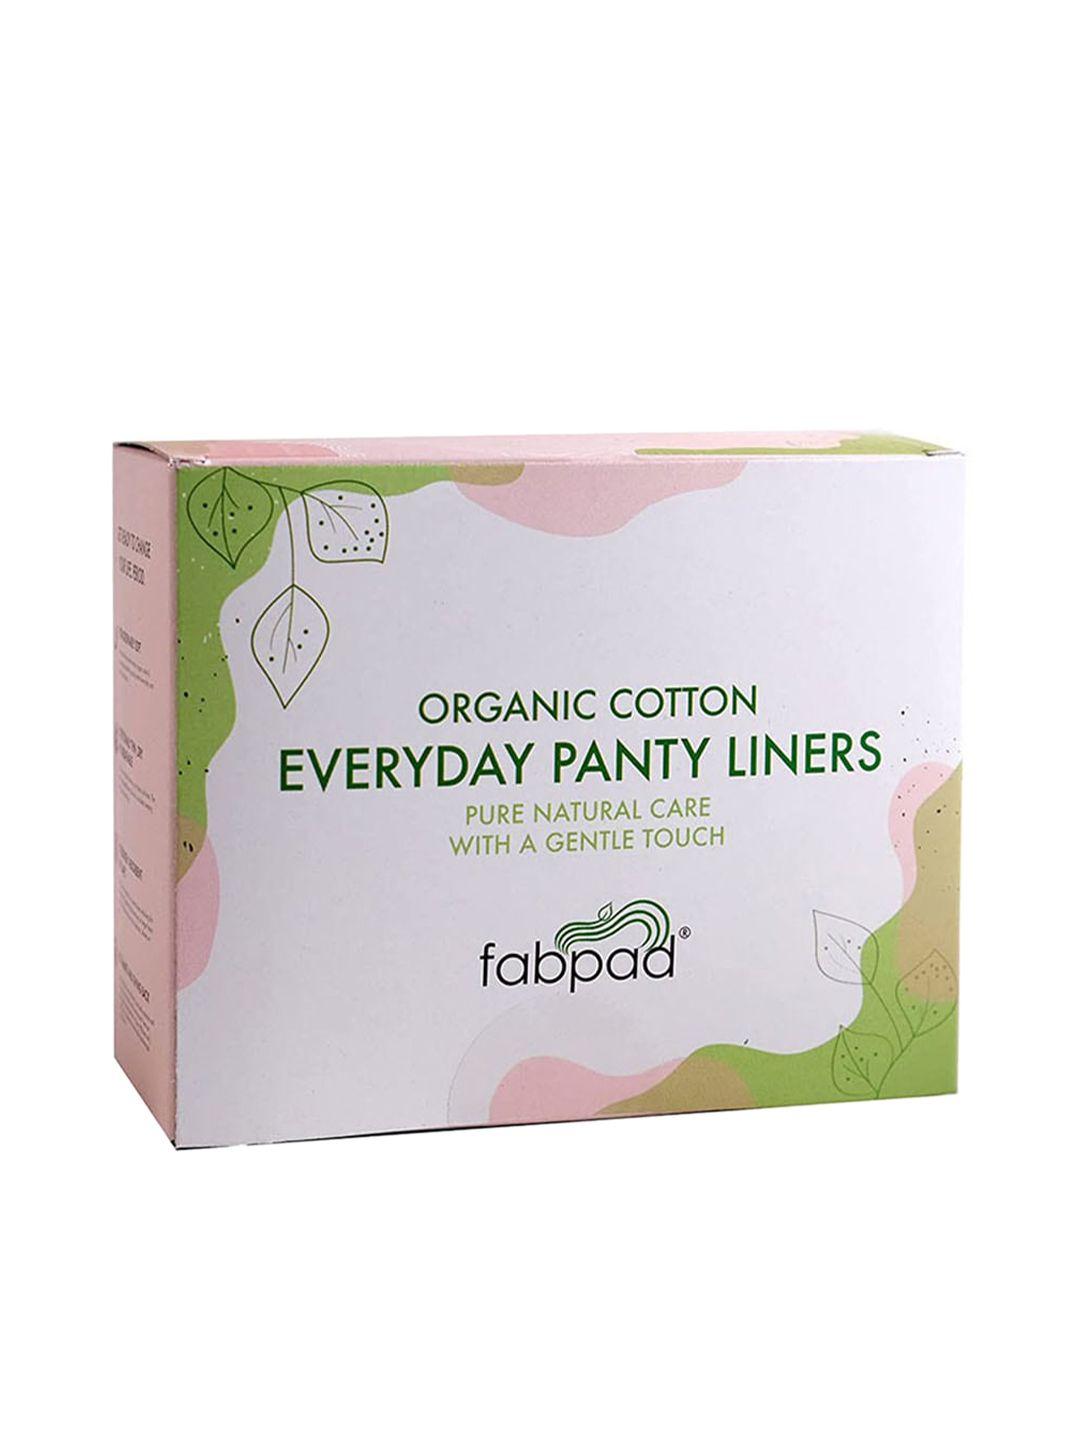 fabpad set of 80 organic cotton ultra thin everyday panty liners